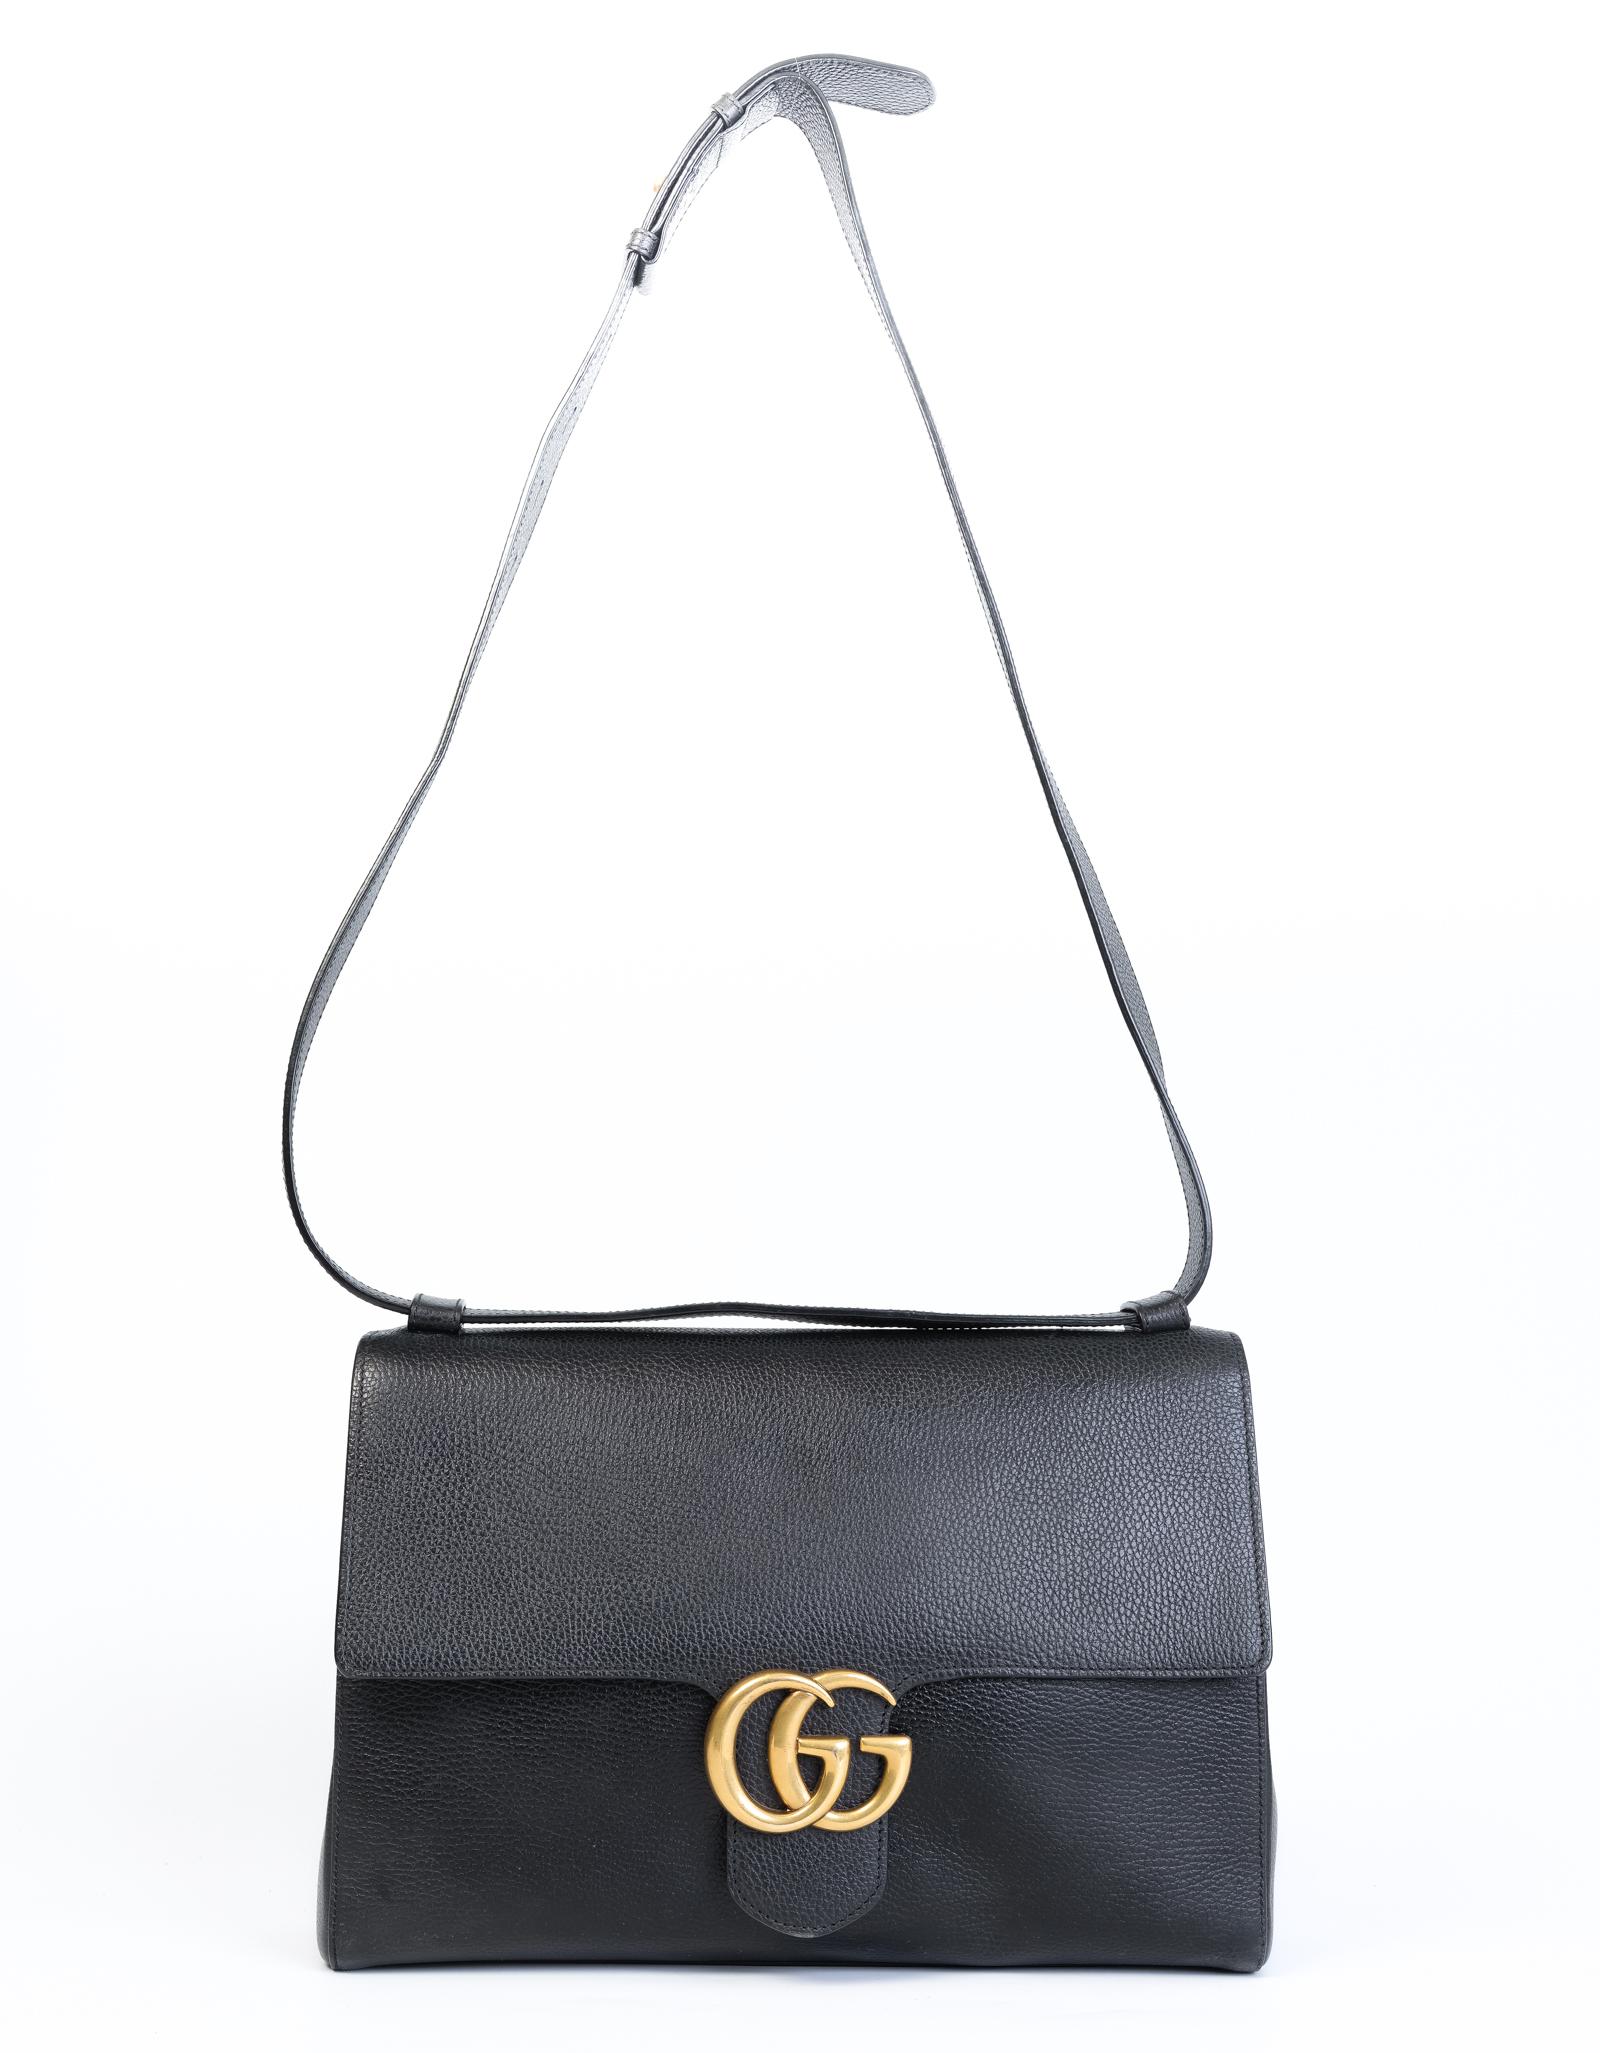 This Gucci Marmont bag is made in lightweight leather with cotton linen lining and antique gold-toned hardware. This bag features one main interior compartment, one wall zip pocket, two slip pockets, and flap closure.

COLOR: Black
MATERIAL: